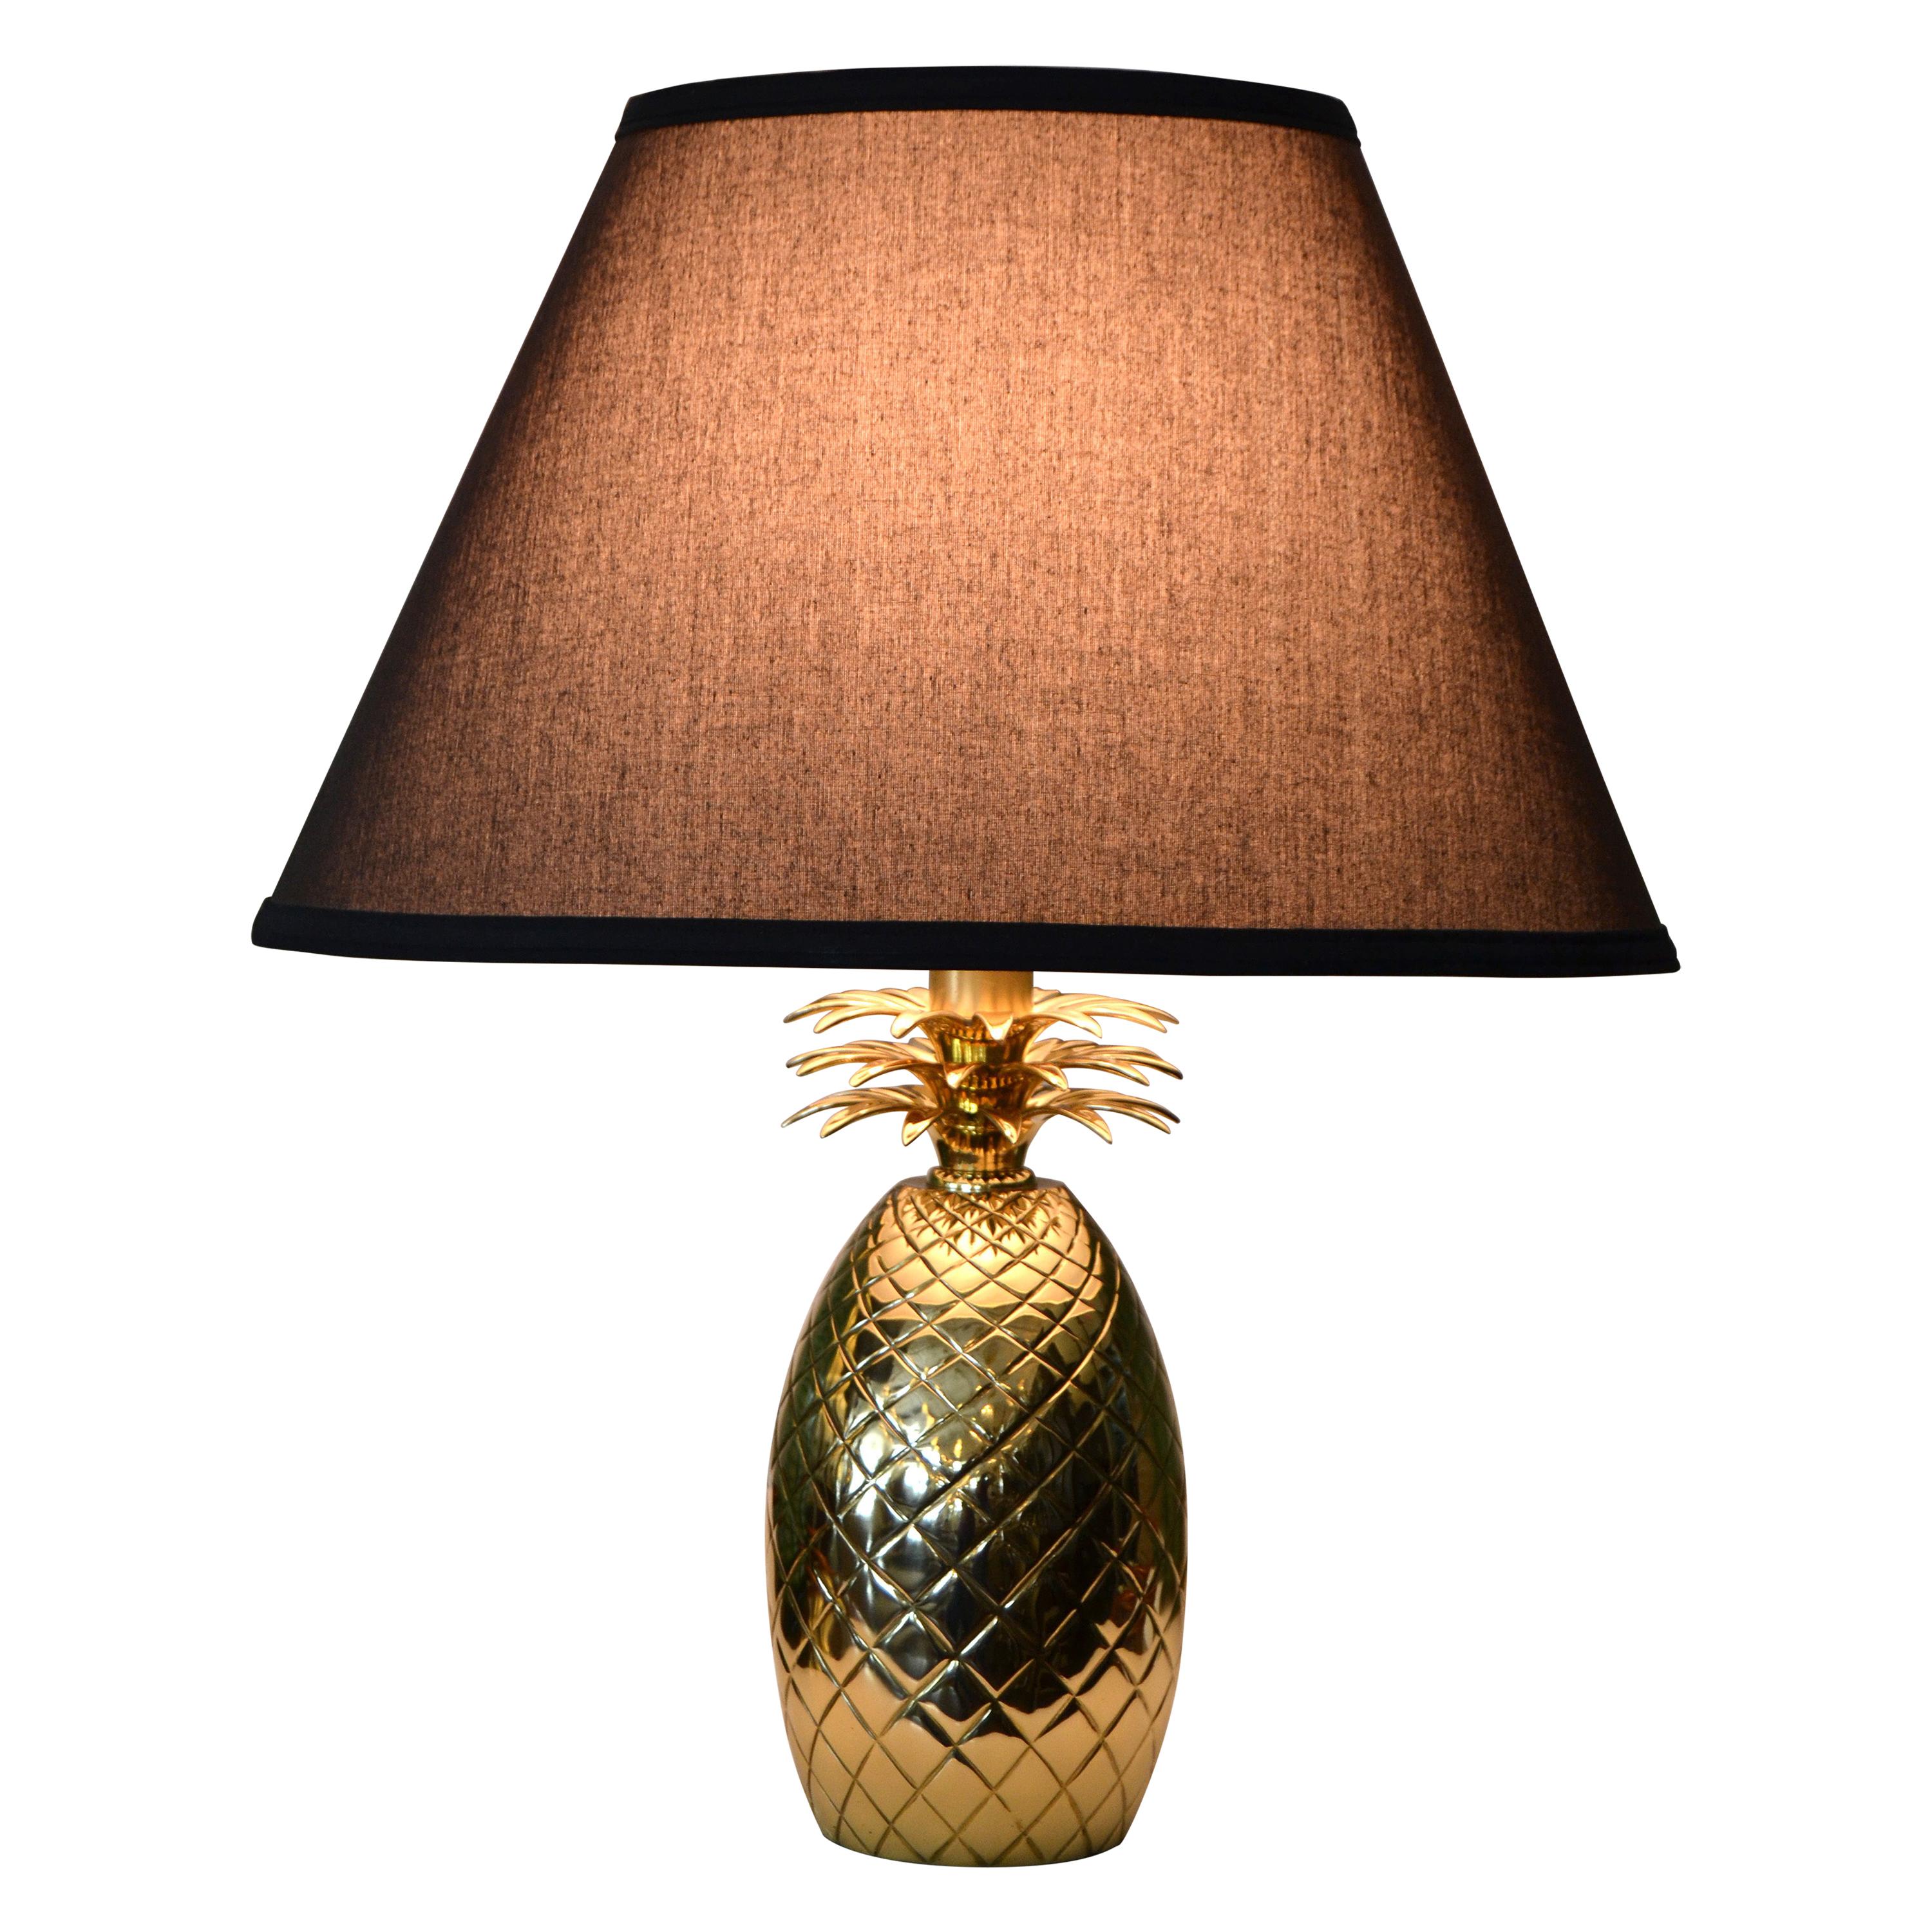 Hollywood Regency Sculptural Bronze Pineapple Table Lamp with Harp and Finial